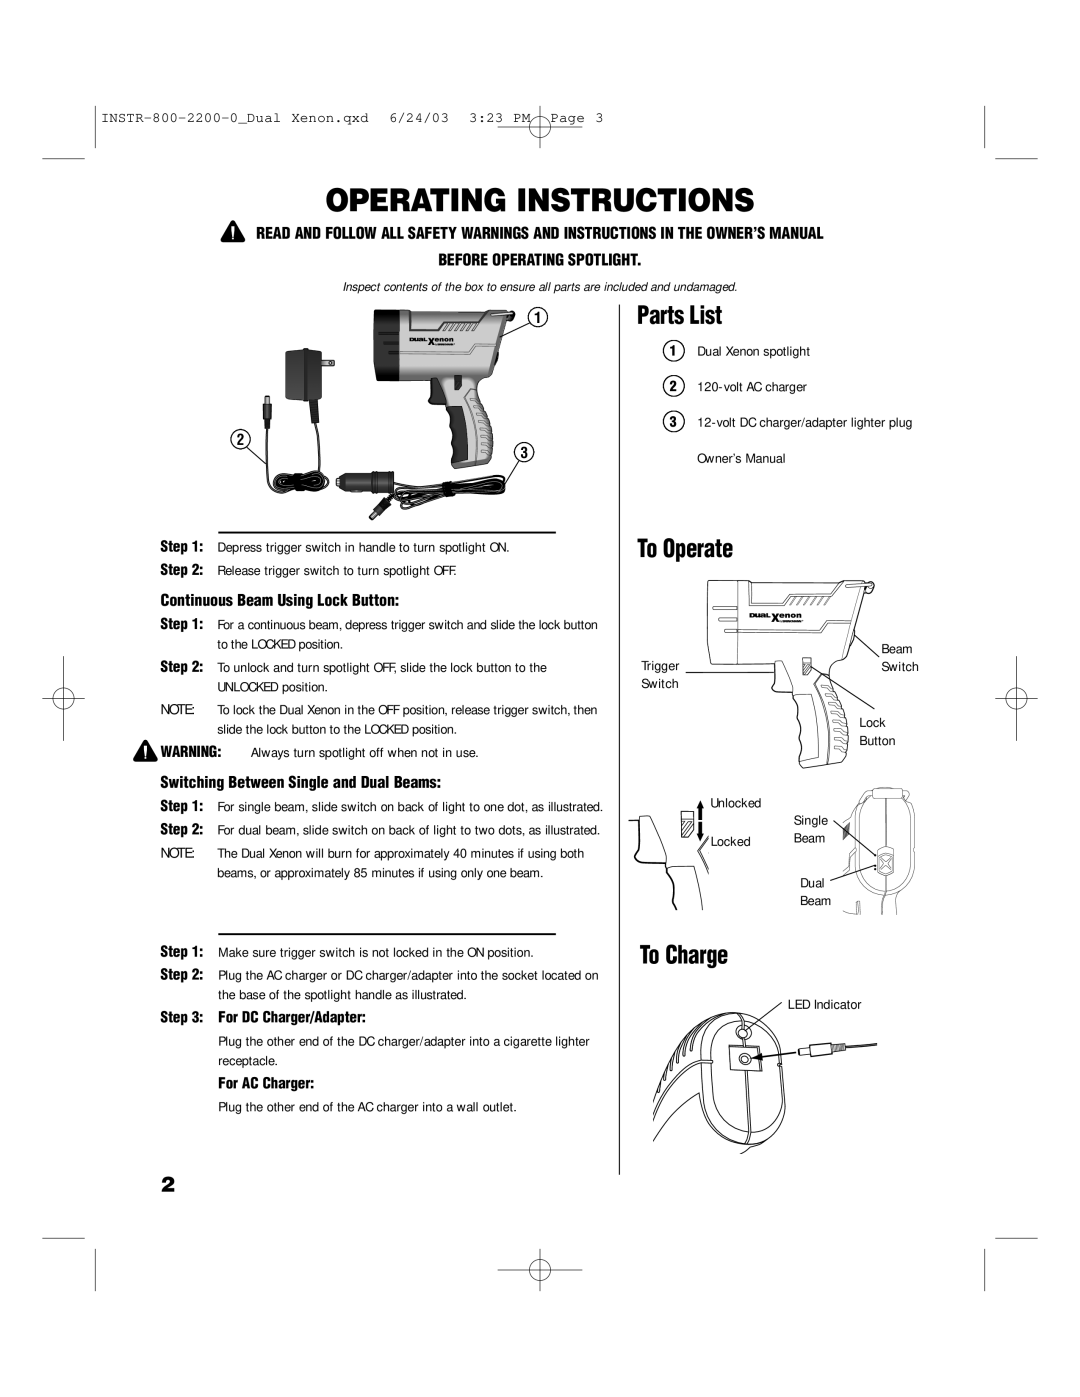 Brinkmann 800-2200-0 Operating Instructions, Parts List, To Operate, To Charge, Continuous Beam Using Lock Button 